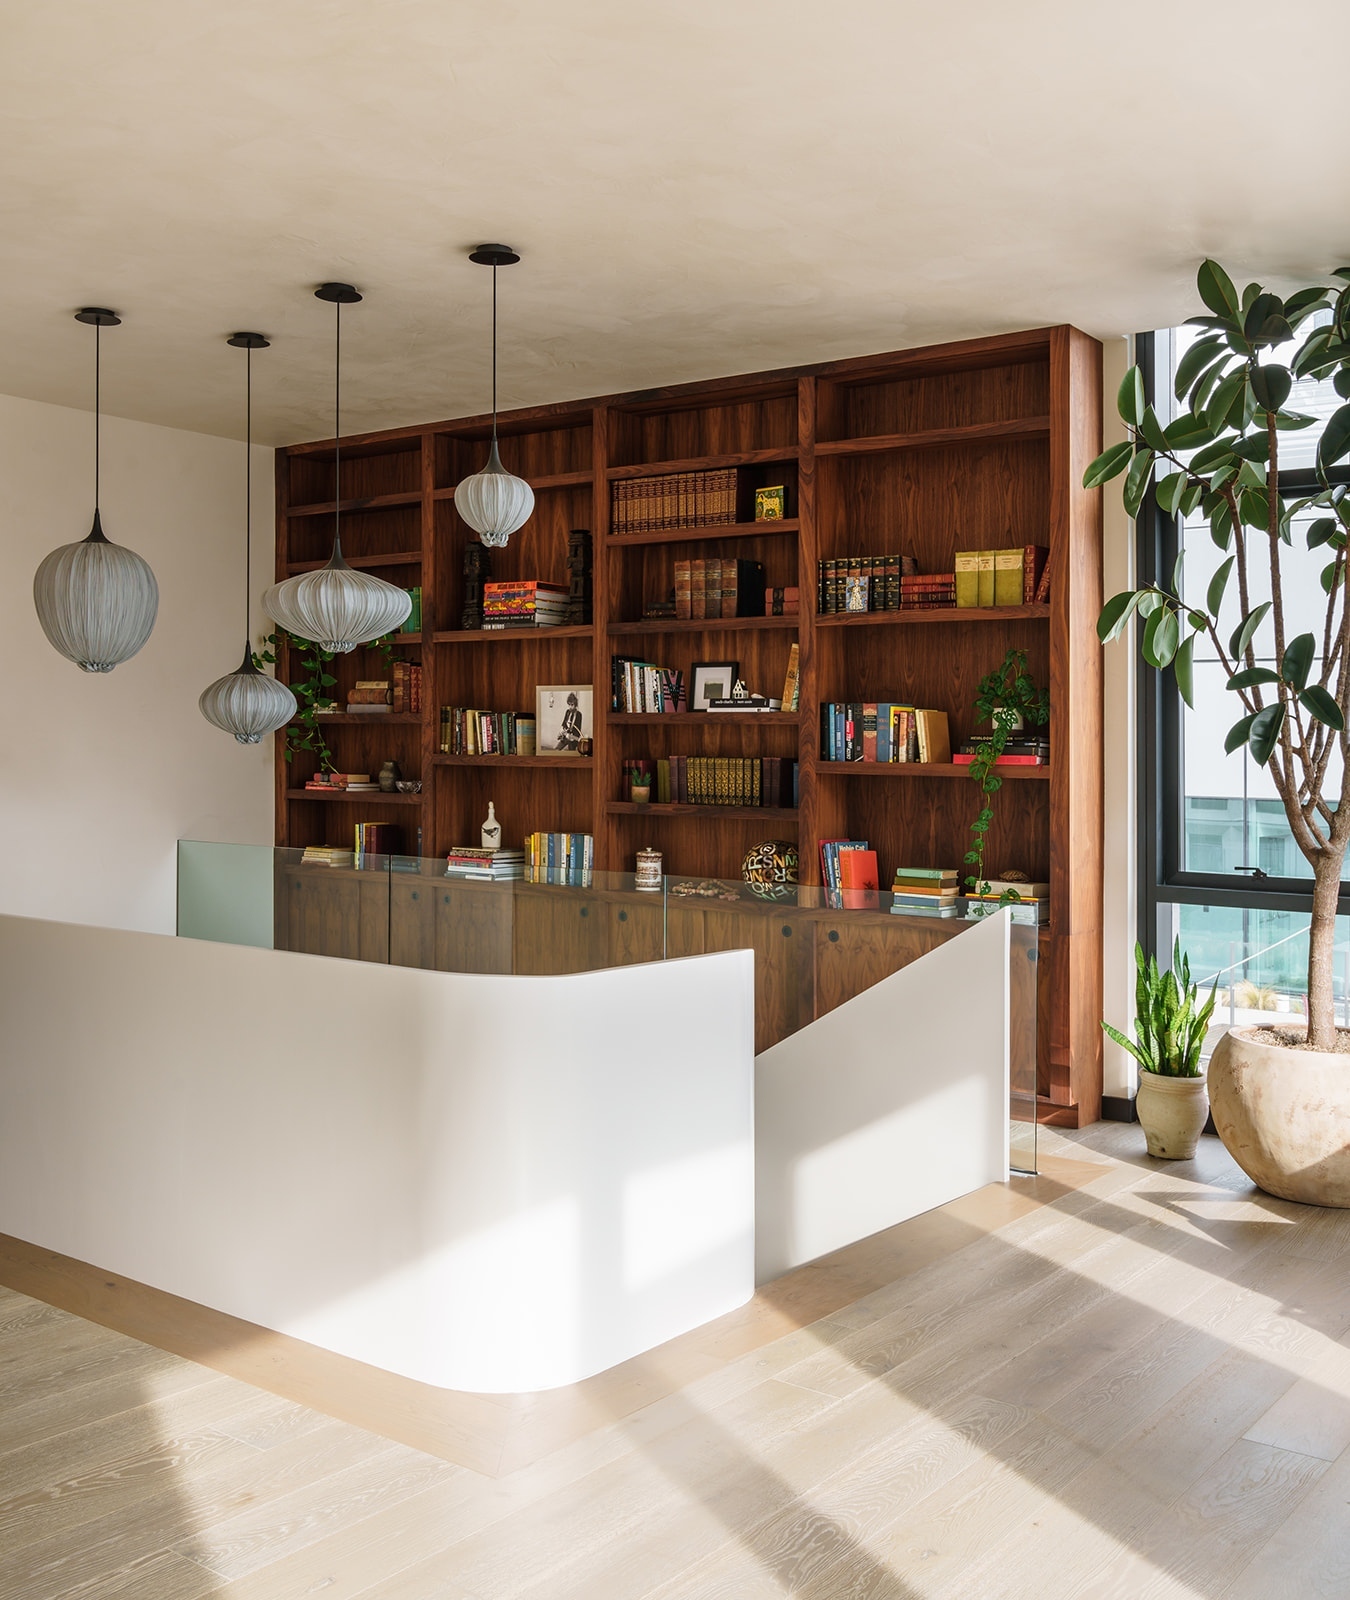 “A bookshelf is as particular to its owner as are his or her clothes; a personality is stamped on a library just as a shoe is shaped by the foot."⁠
⁠
.⁠
.⁠
.⁠
⁠
Photography: @likeness_studio⁠
Interior: @studioagroup⁠
Architect: @systemdarchitecture⁠
⁠
⁠
⁠